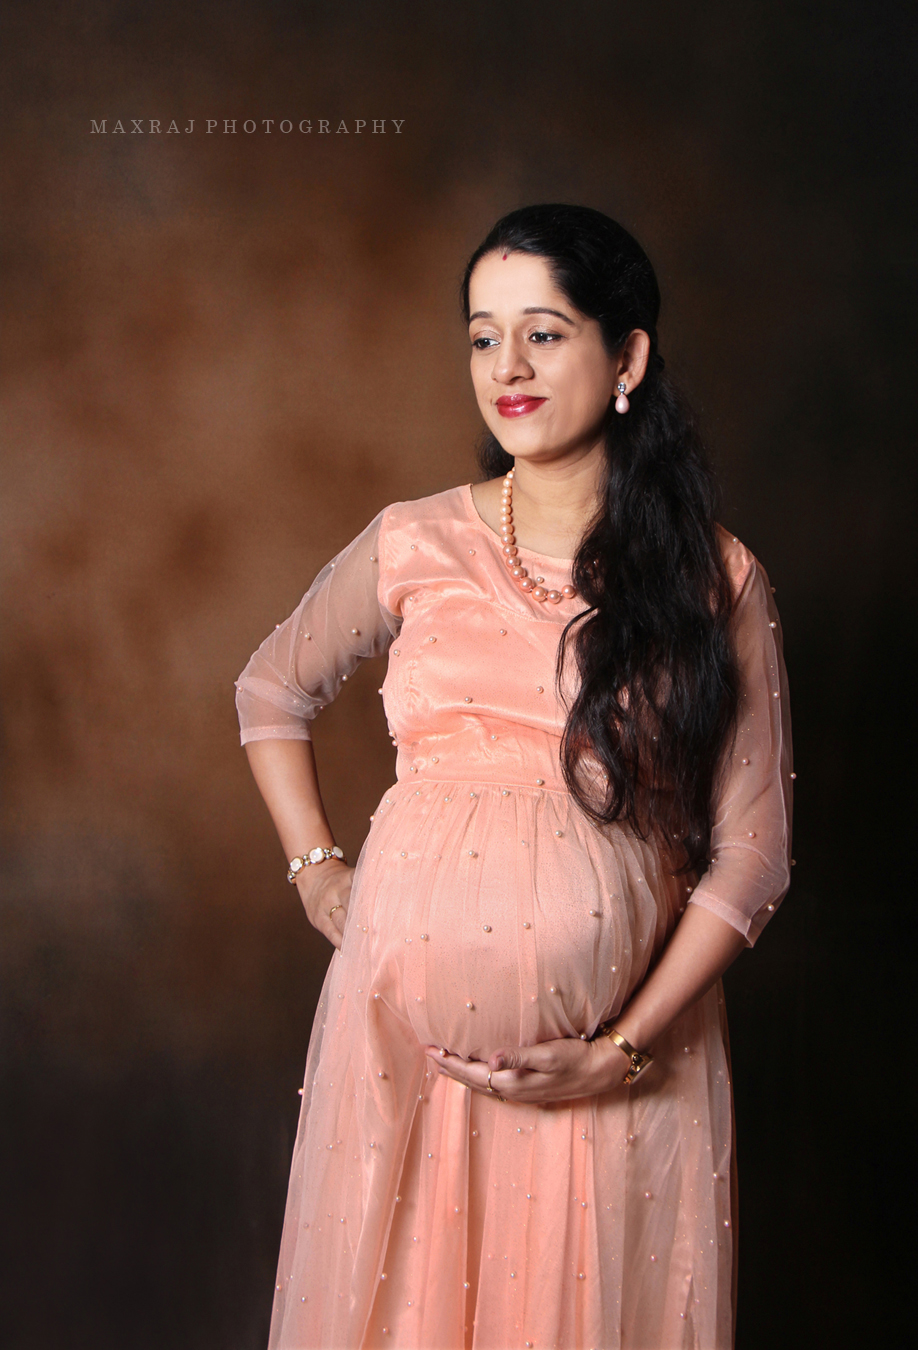 top maternity photographer in pune, maternity photoshoot ideas